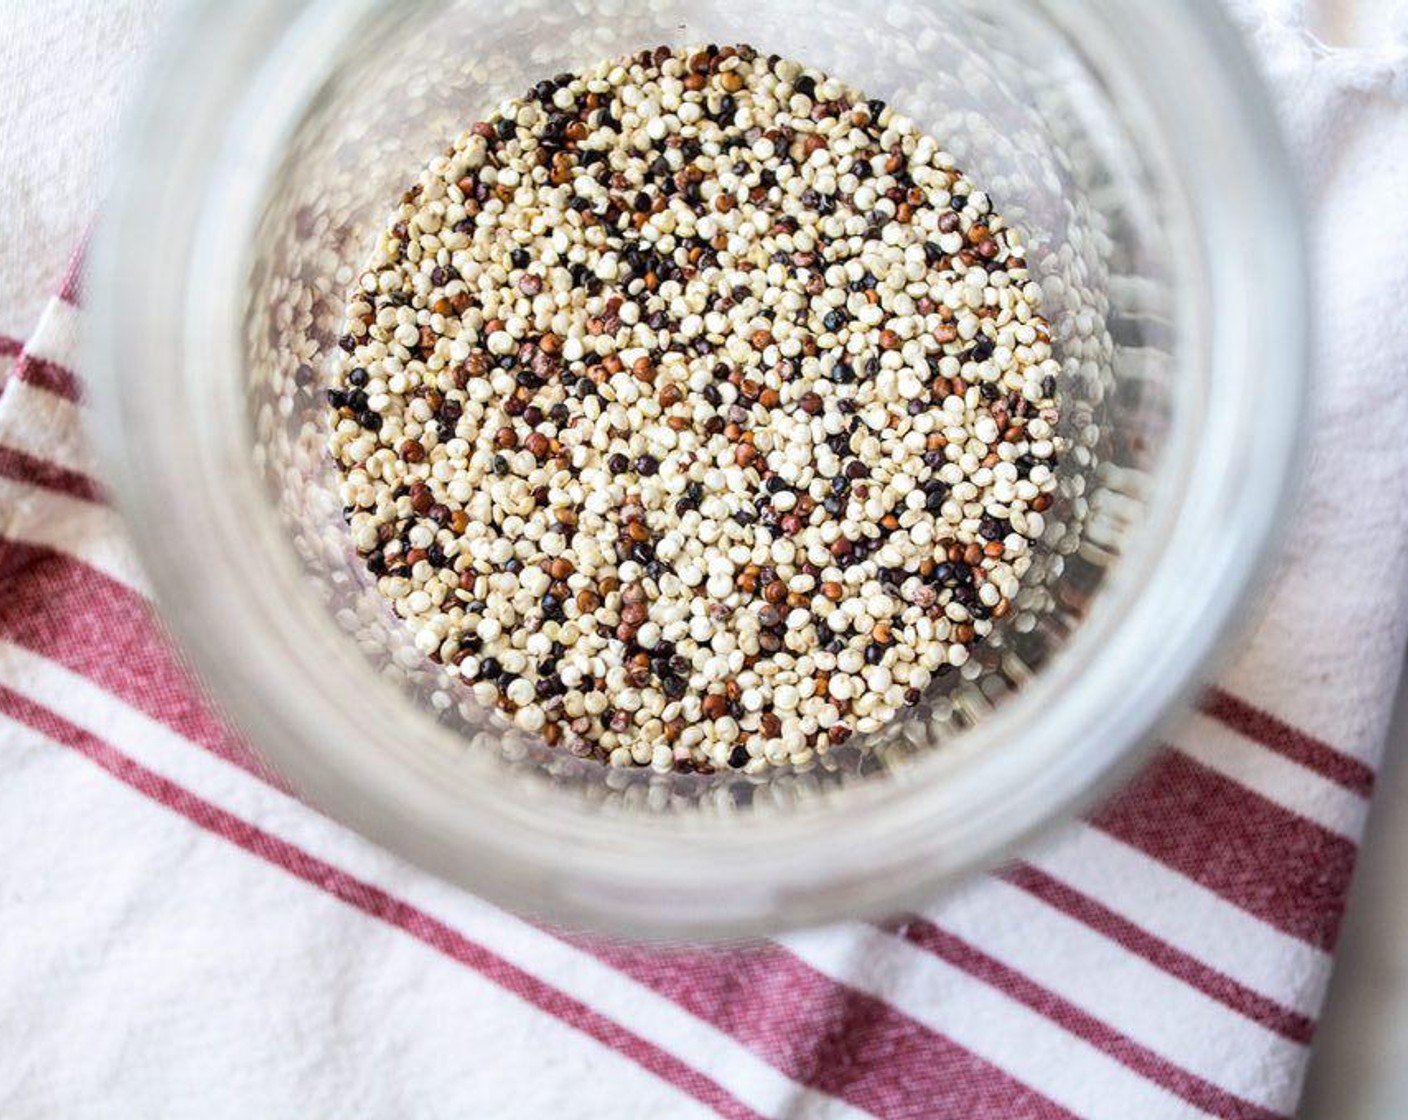 step 2 Thoroughly rinse the Quinoa (1/4 cup) to remove the saponin by adding uncooked quinoa to a bowl, filling it with clean water and soaking for a few minutes. Use a wire whisk to move the quinoa around in the water, then strain the quinoa in a fine-mesh sieve and rinse with fresh water.